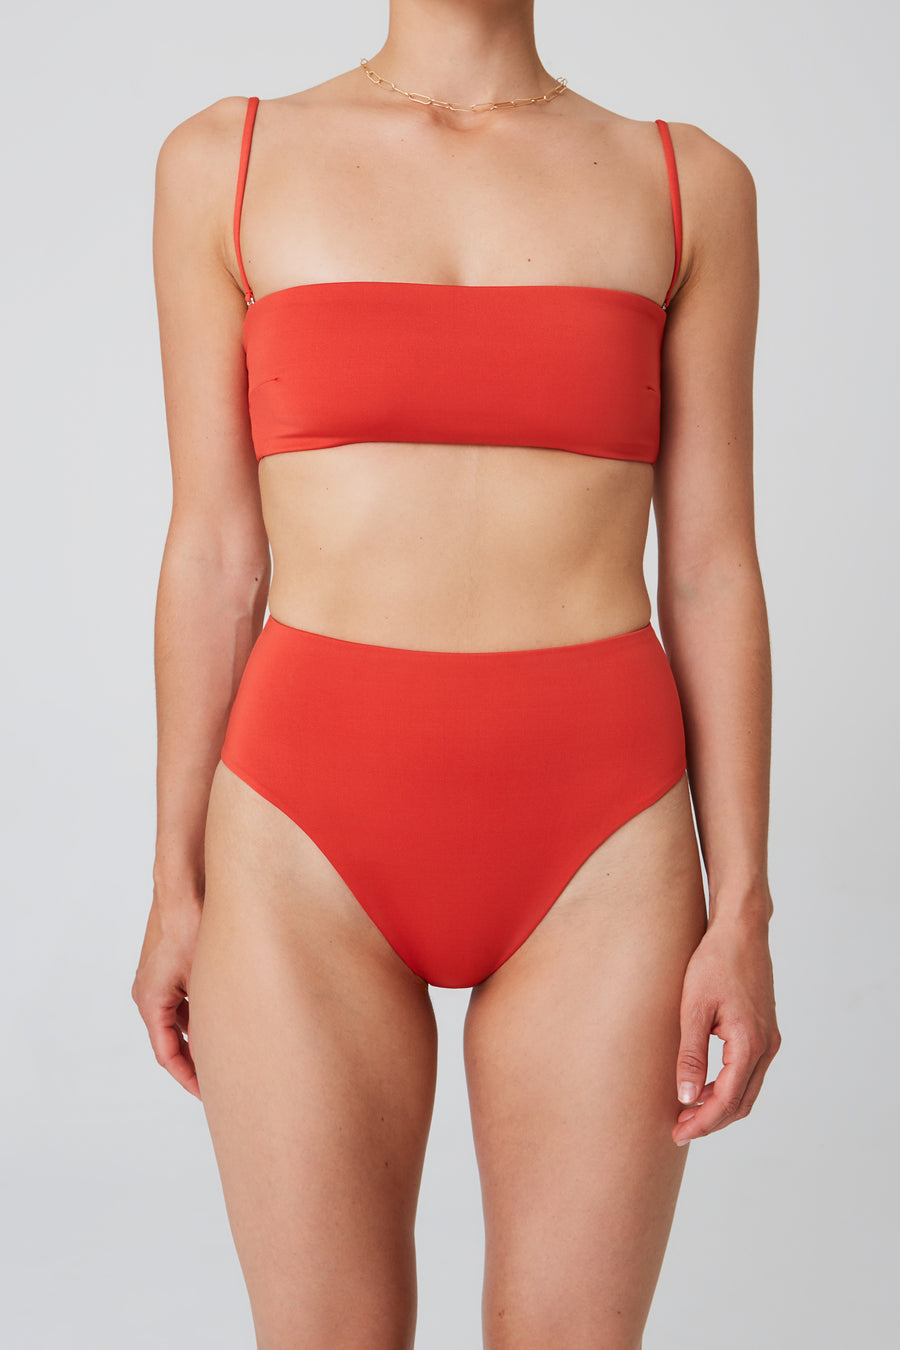 TOP – bandeau, red